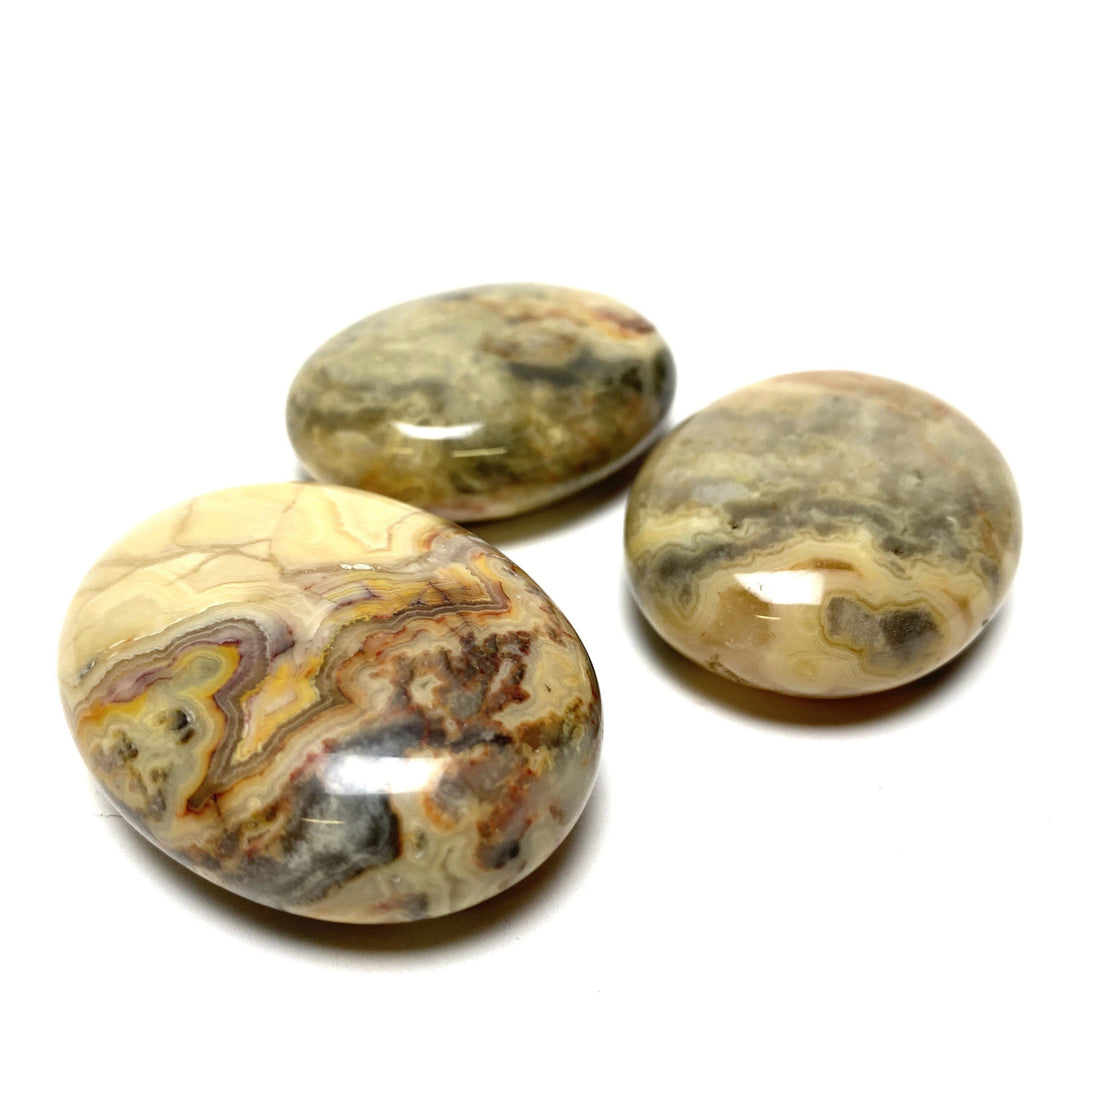 Crazy Lace Agate Pillow Stones Crazy Lace Agate Crystals A. $14.00 